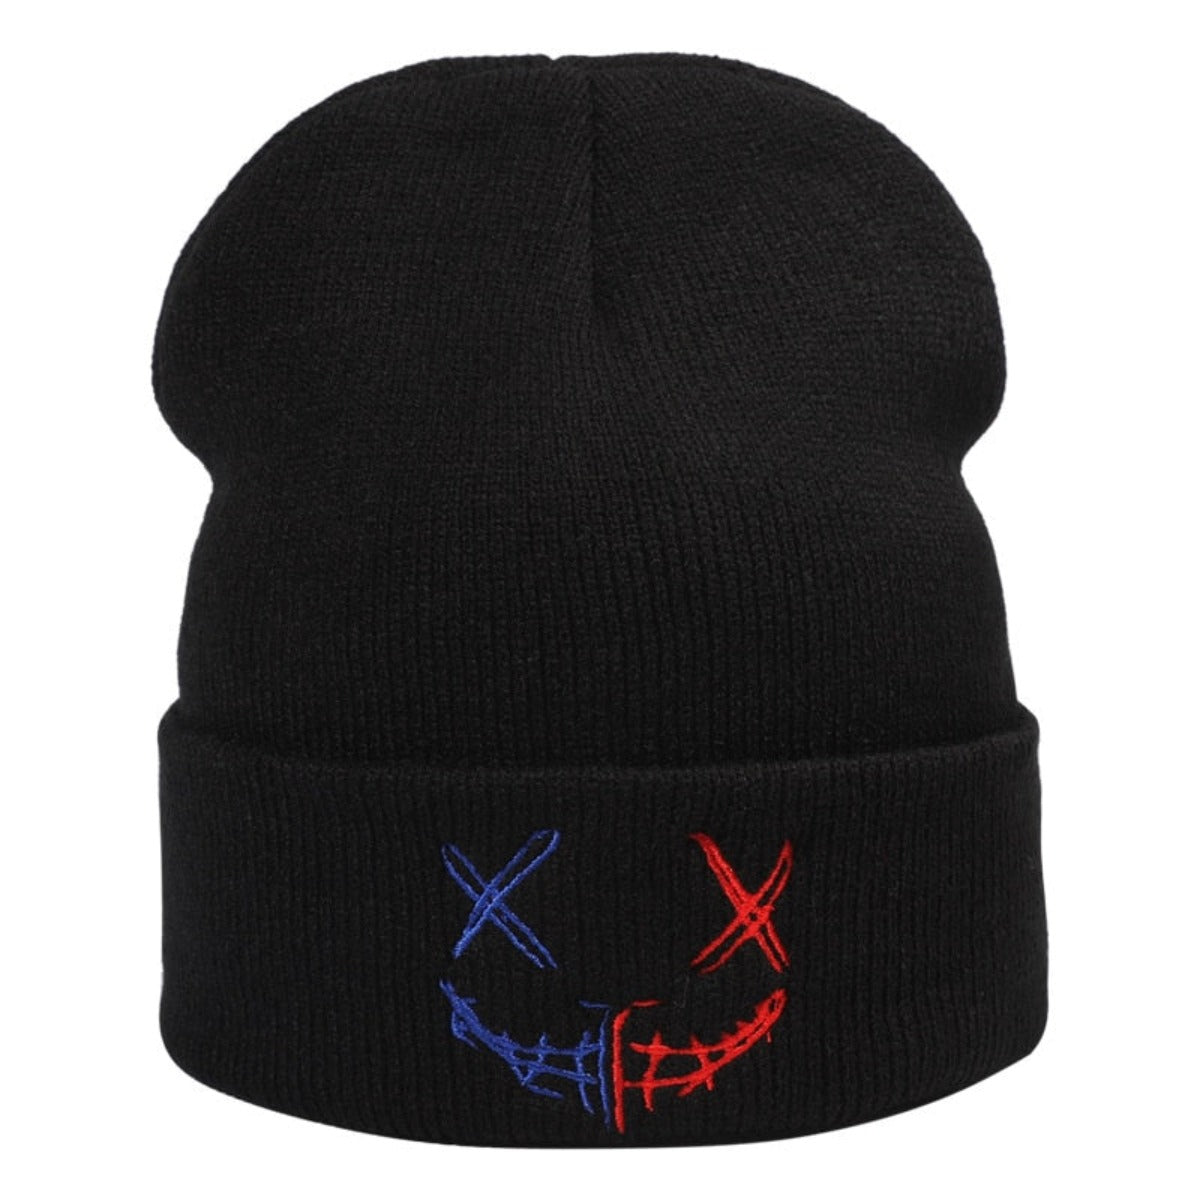 Stay warm and stylish on cold winter days with this Unisex Embroidered Beanie Hat. Made from high-quality materials, this Unisex Embroidered Beanie Hat features a smiley face design for a cheerful look.